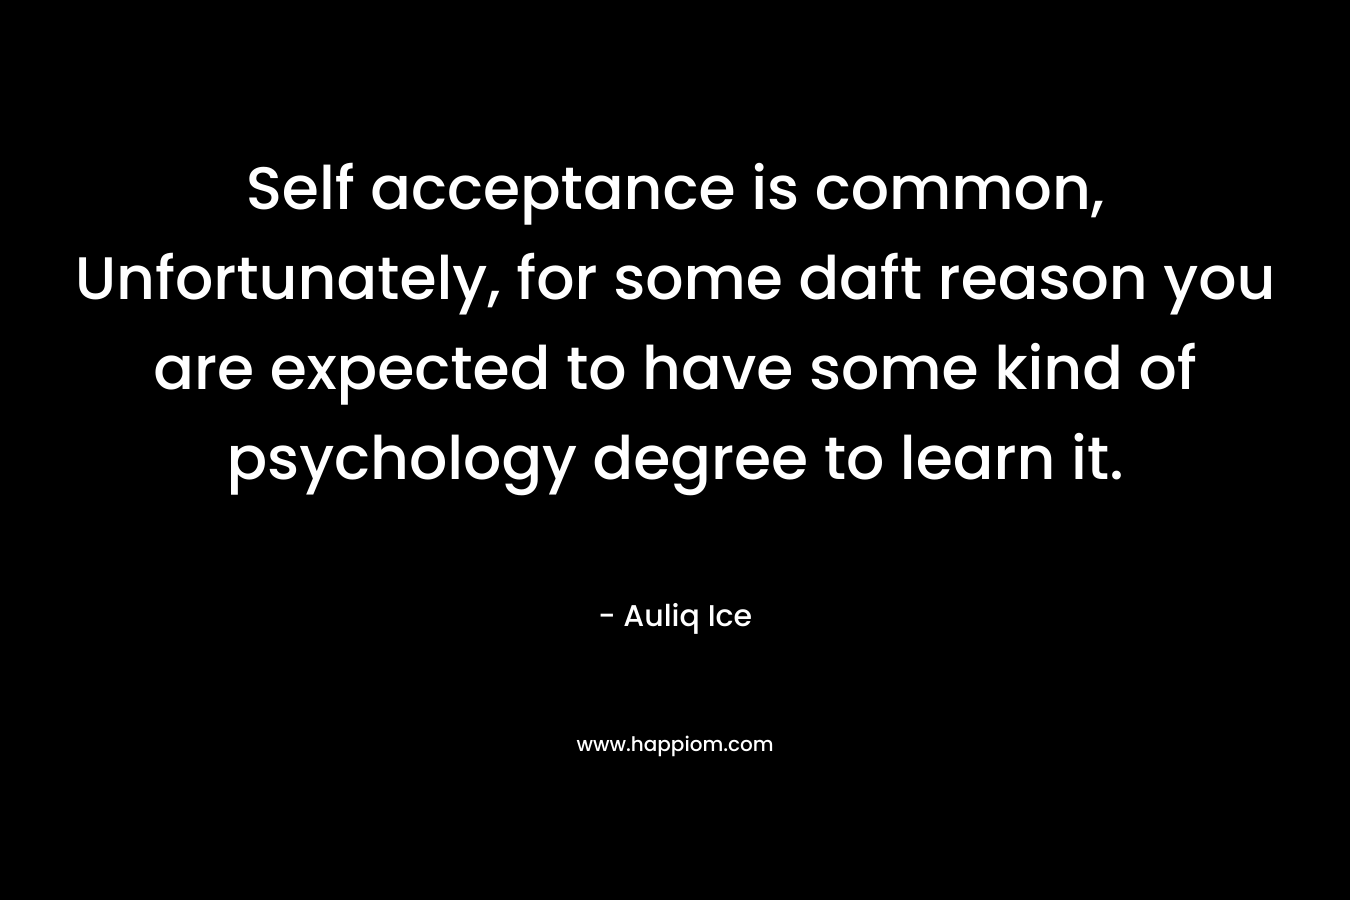 Self acceptance is common, Unfortunately, for some daft reason you are expected to have some kind of psychology degree to learn it. – Auliq Ice